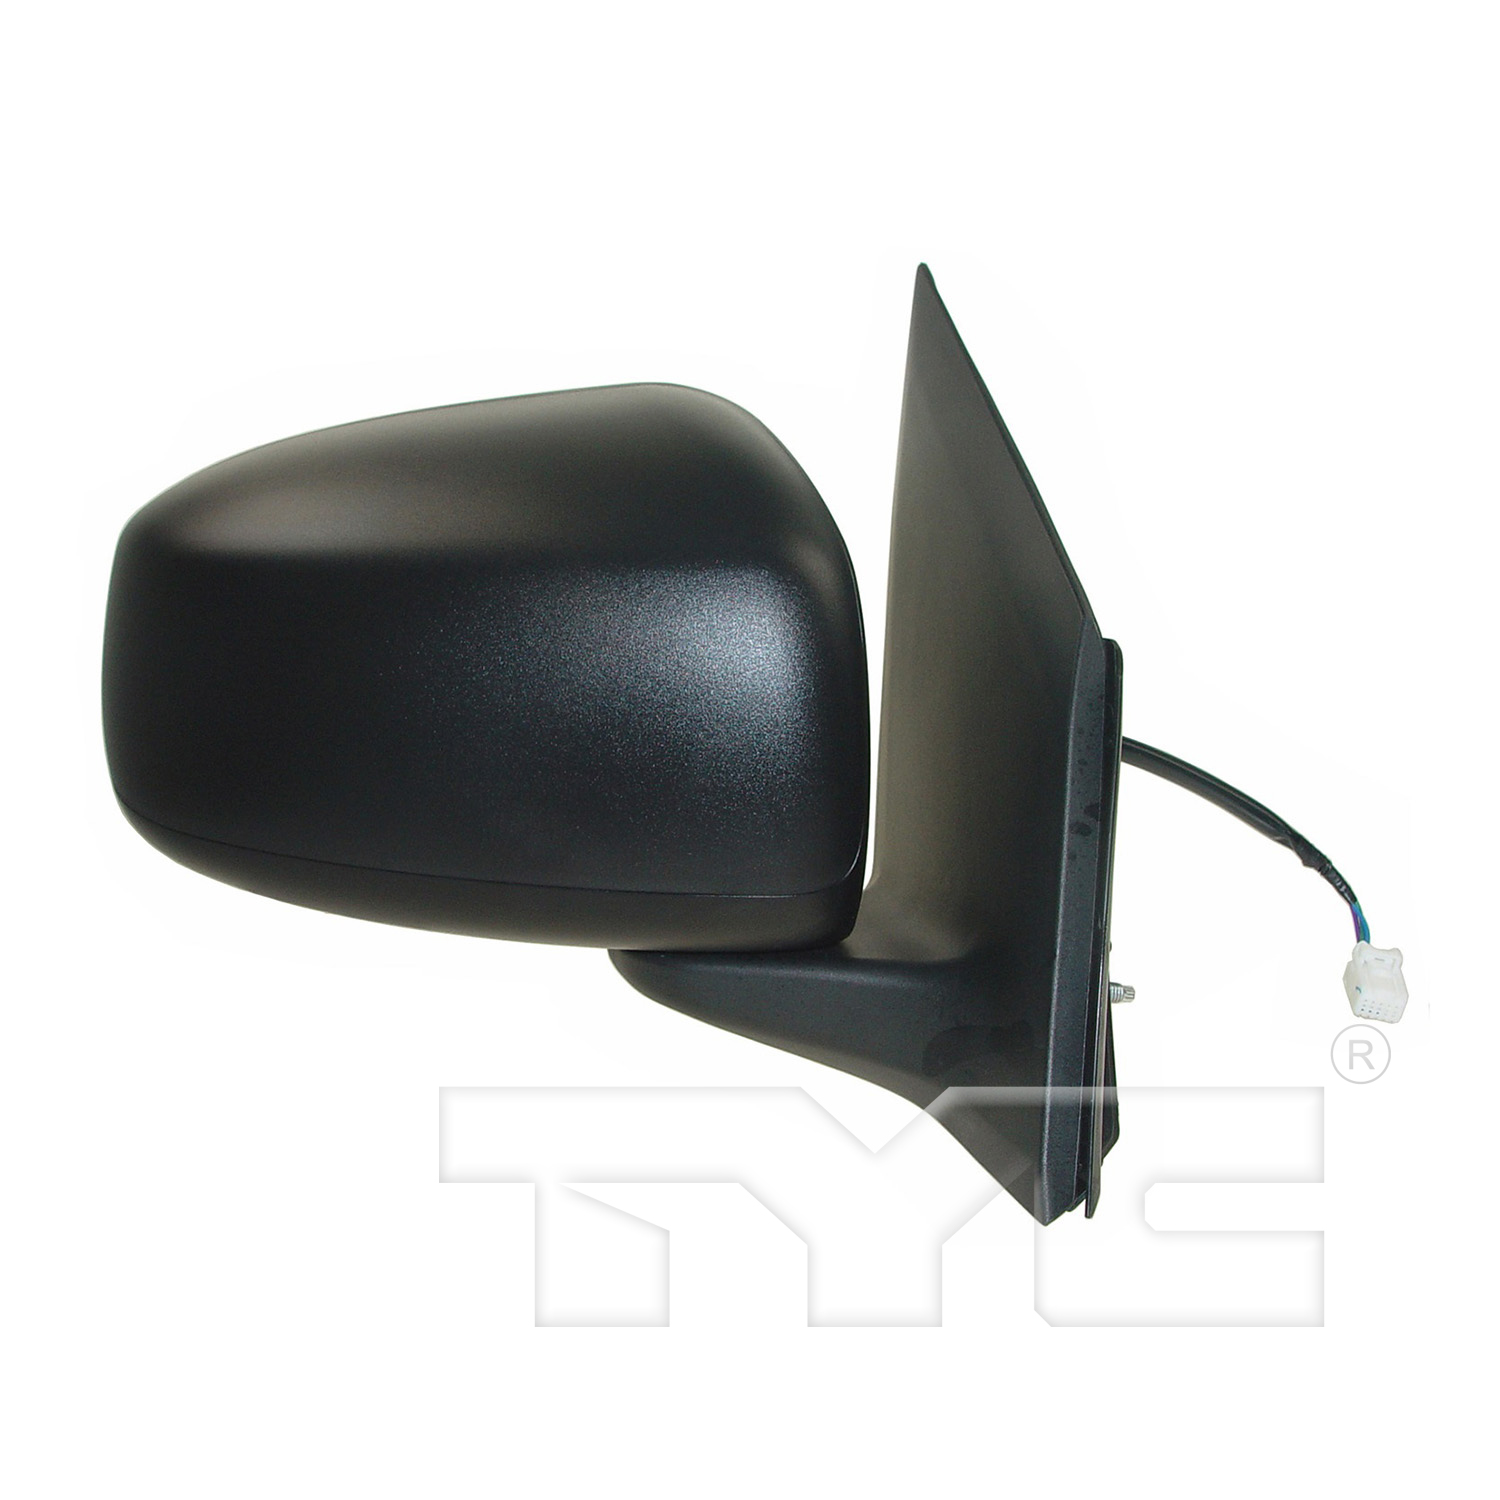 Aftermarket MIRRORS for MITSUBISHI - MIRAGE G4, MIRAGE G4,17-22,RT Mirror outside rear view